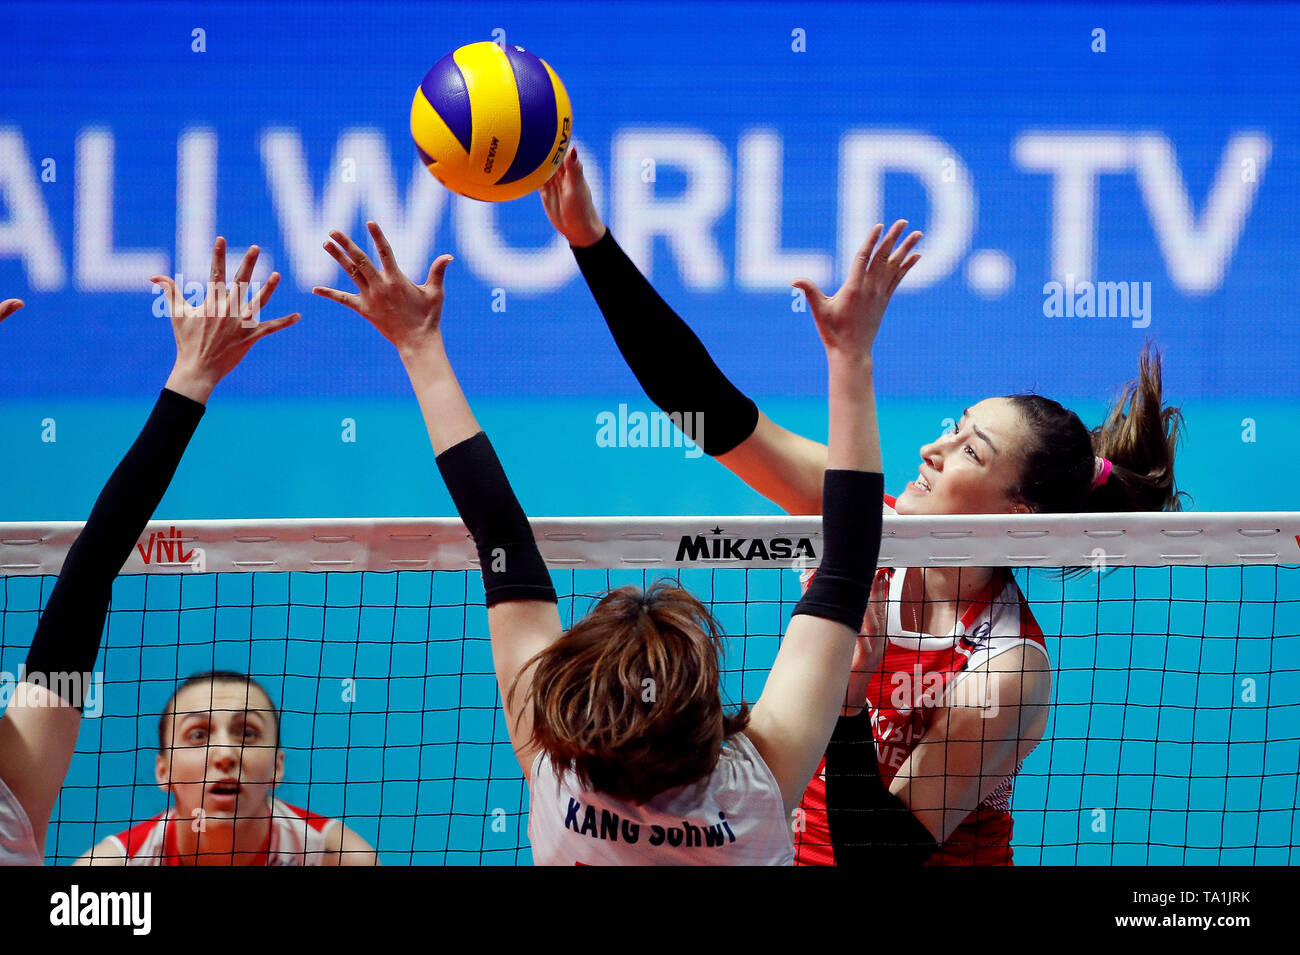 Belgrade, Serbia. 21st May, 2019. Turkeys Hande Baladin (R) spikes during Volleyball Nations League match between South Korea and Turkey in Belgrade, Serbia, on May 21, 2019